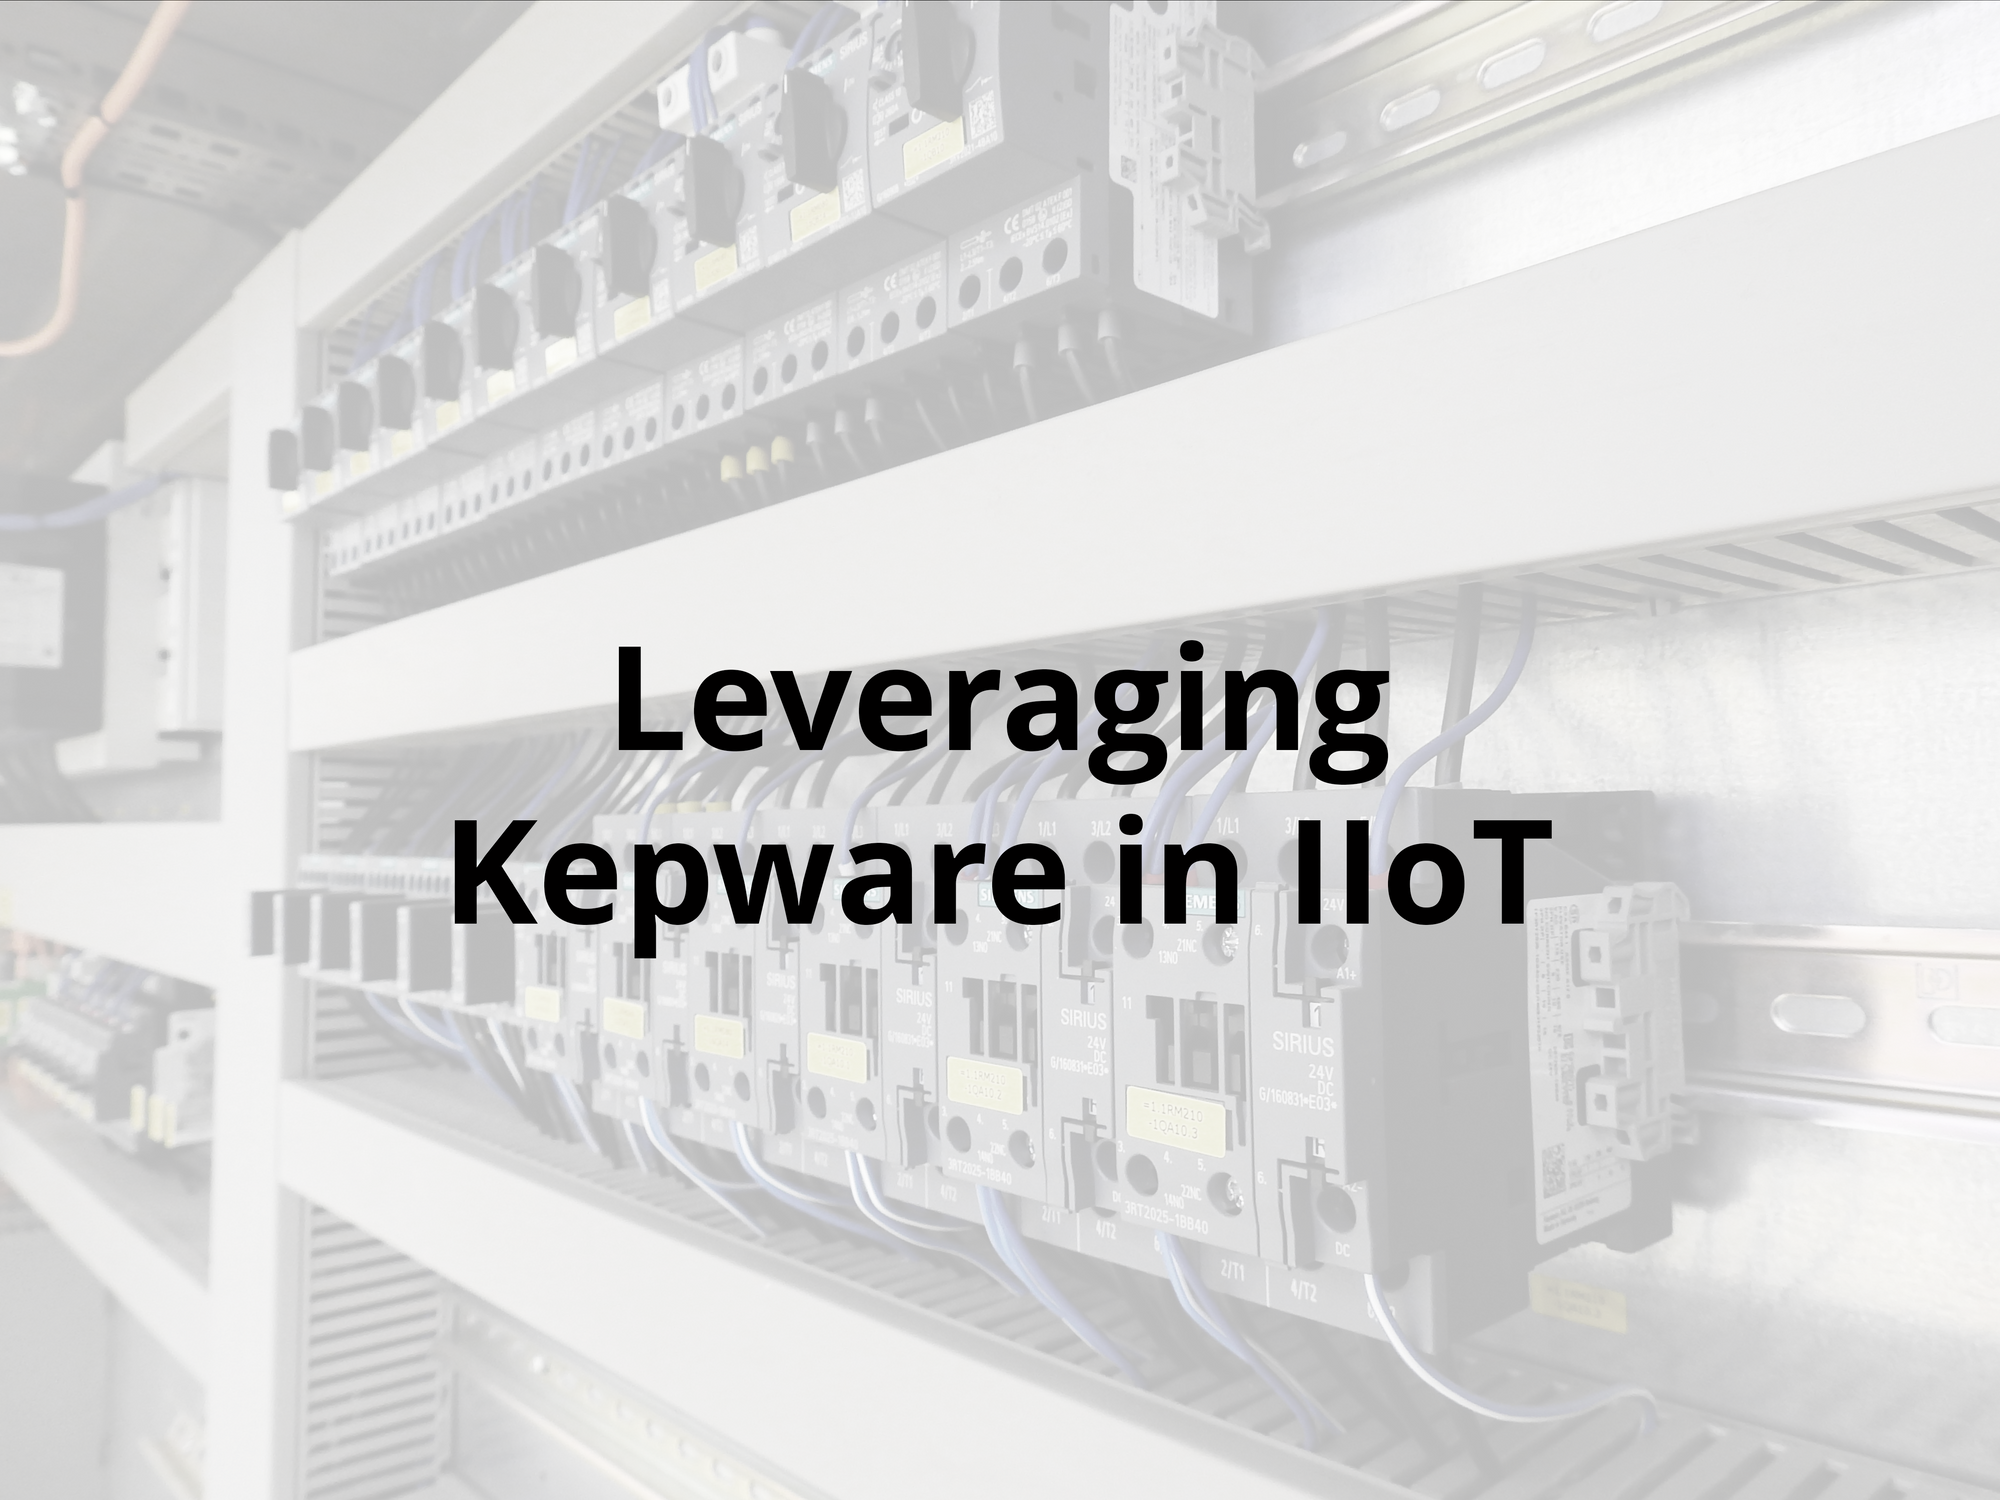 Leveraging Kepware in IIoT and how to mitigate its current technical limitations